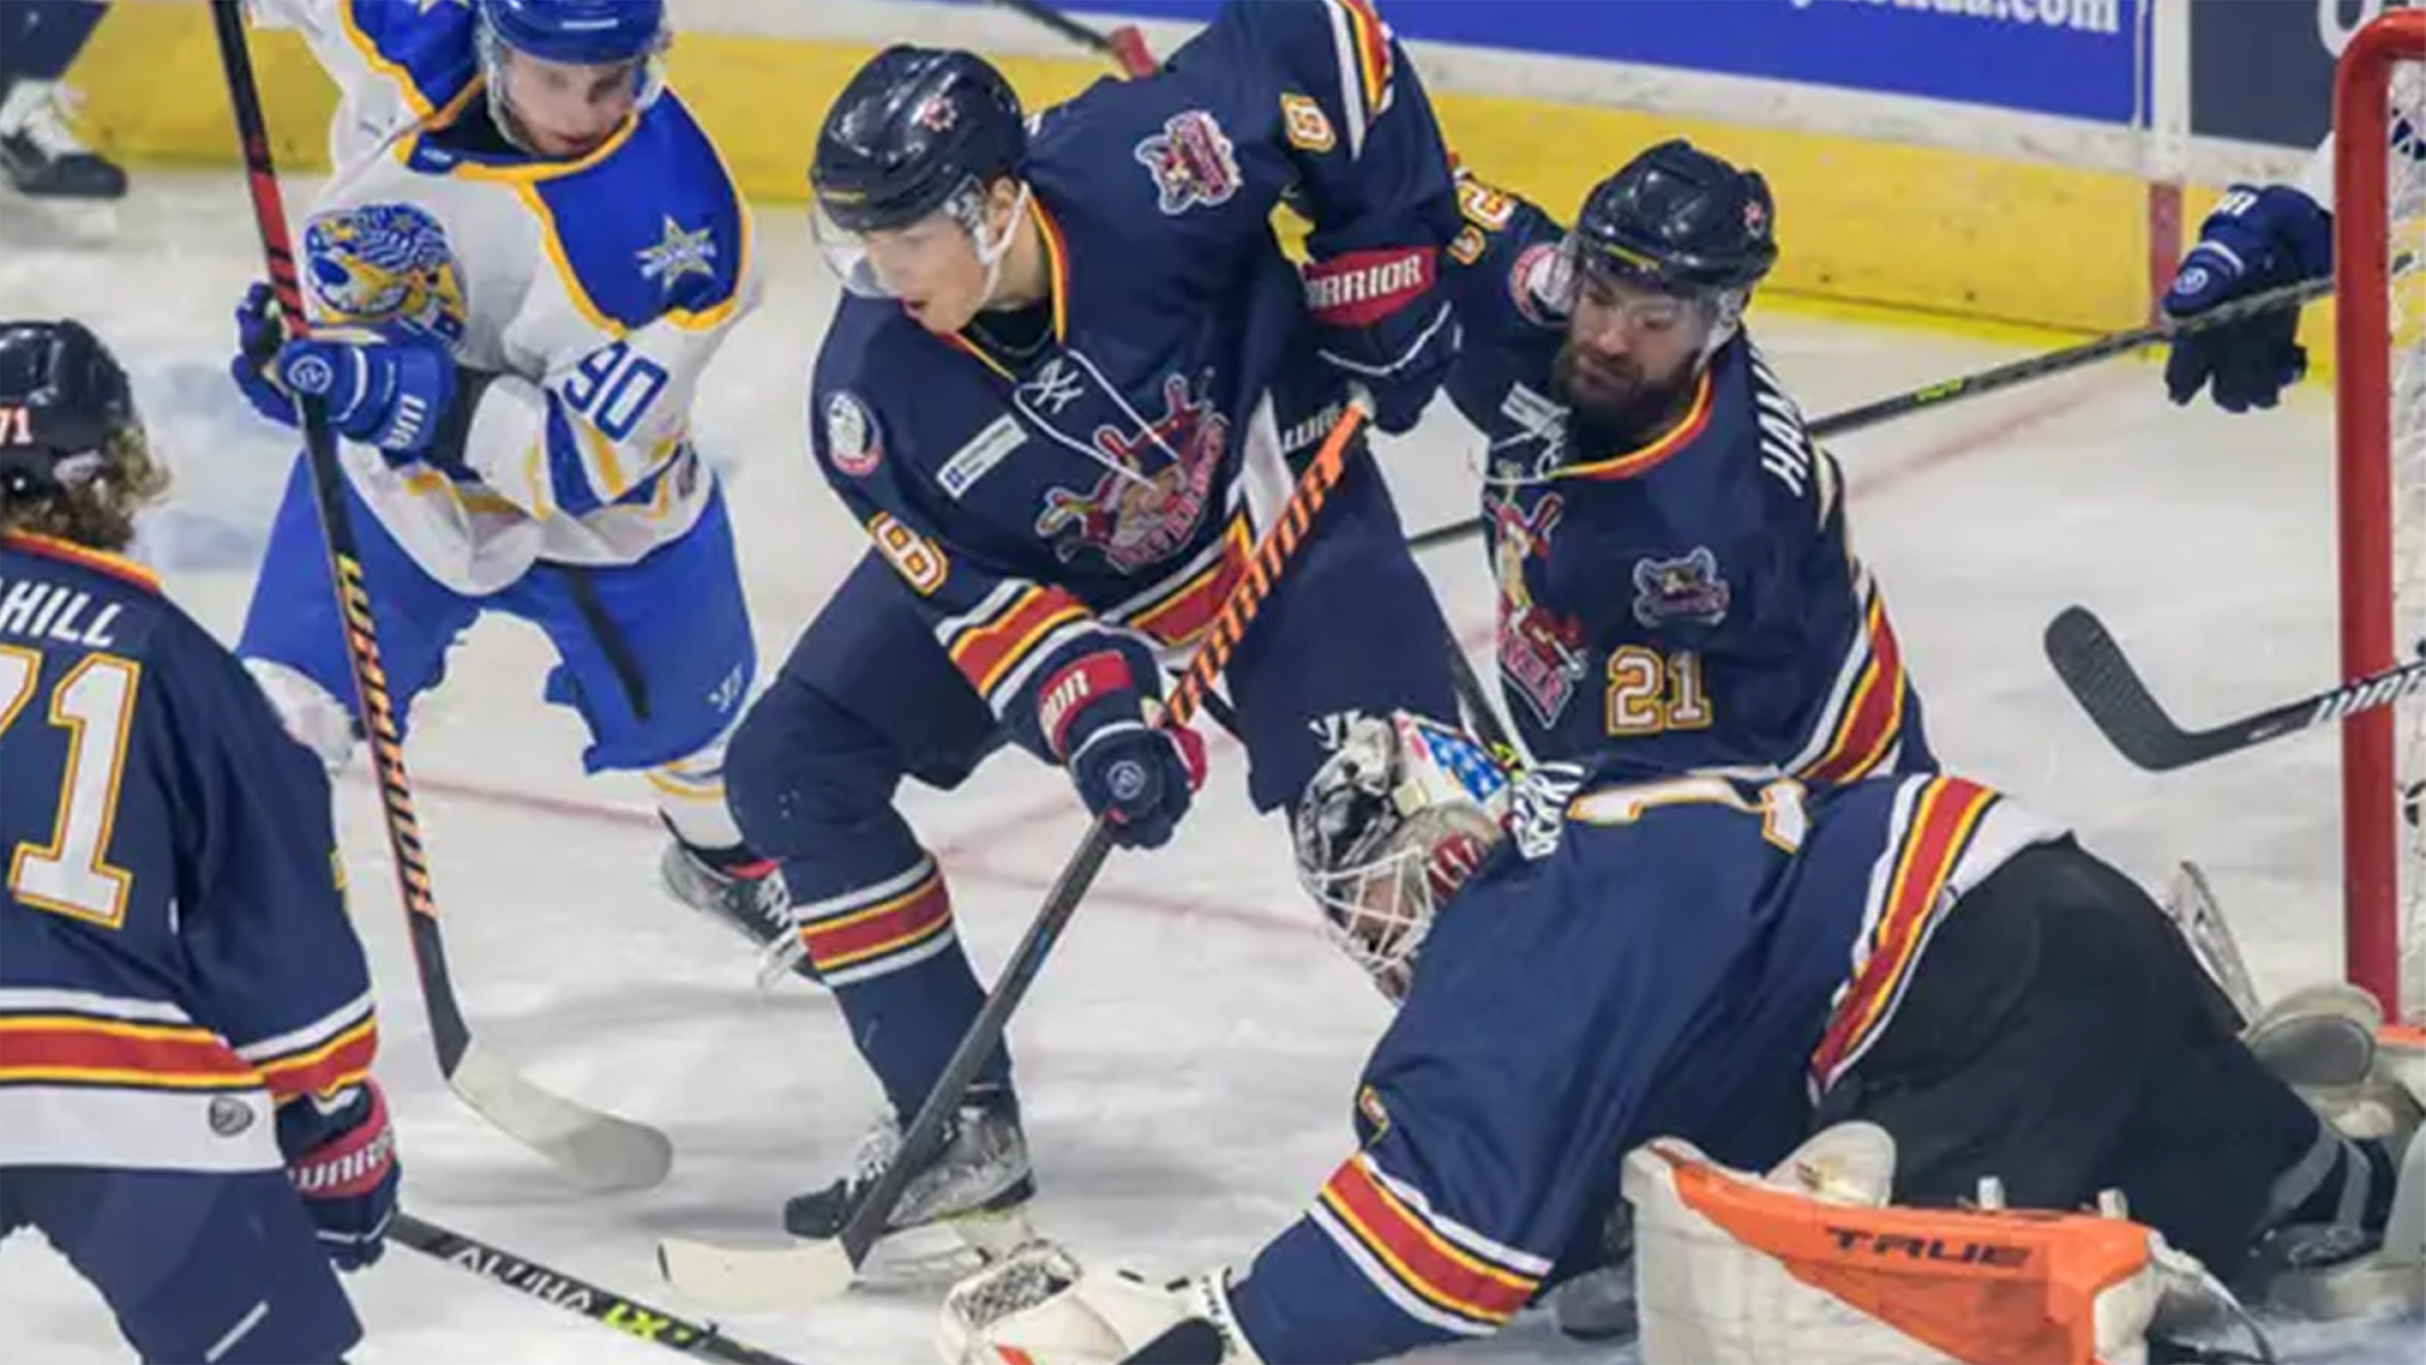 Peoria Rivermen v Evansville Thunderbolts in Peoria promo photo for Me + 3 4 Pack  presale offer code